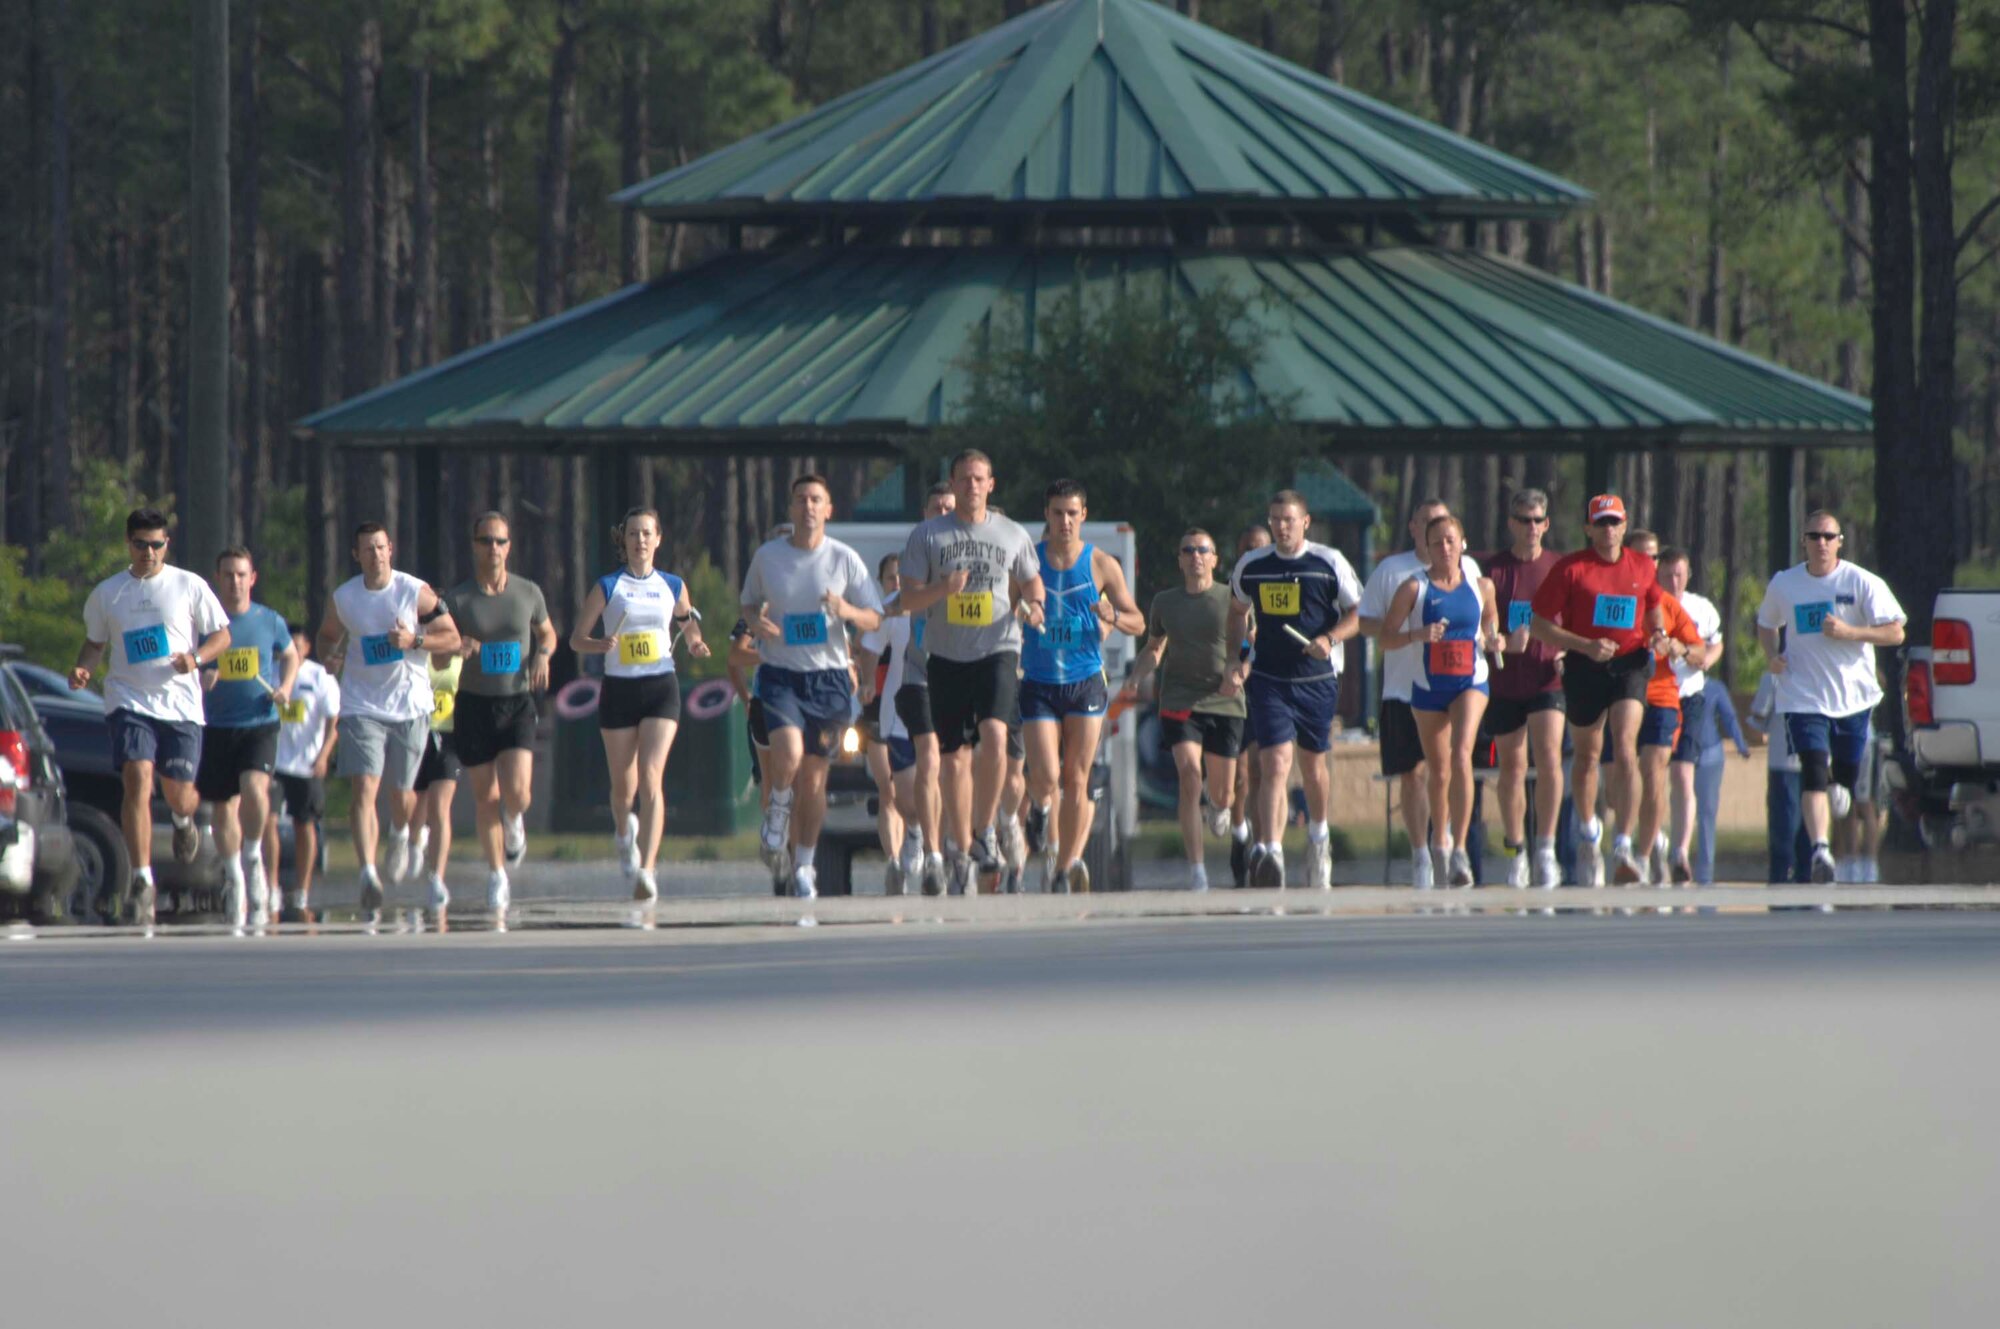 SHAW AIR FORCE BASE, S.C.-- The 20th Fighter Wing held a 3rd annual half marathon sponsored by the 20th Force Support Squadron here May 3. The half marathon consisted of nine four-person teams, with each individual running more than three miles, and 20 individuals running the entire 13.1 miles. (U.S. Air Force photo/Staff Sgt. Nathan Bevier)